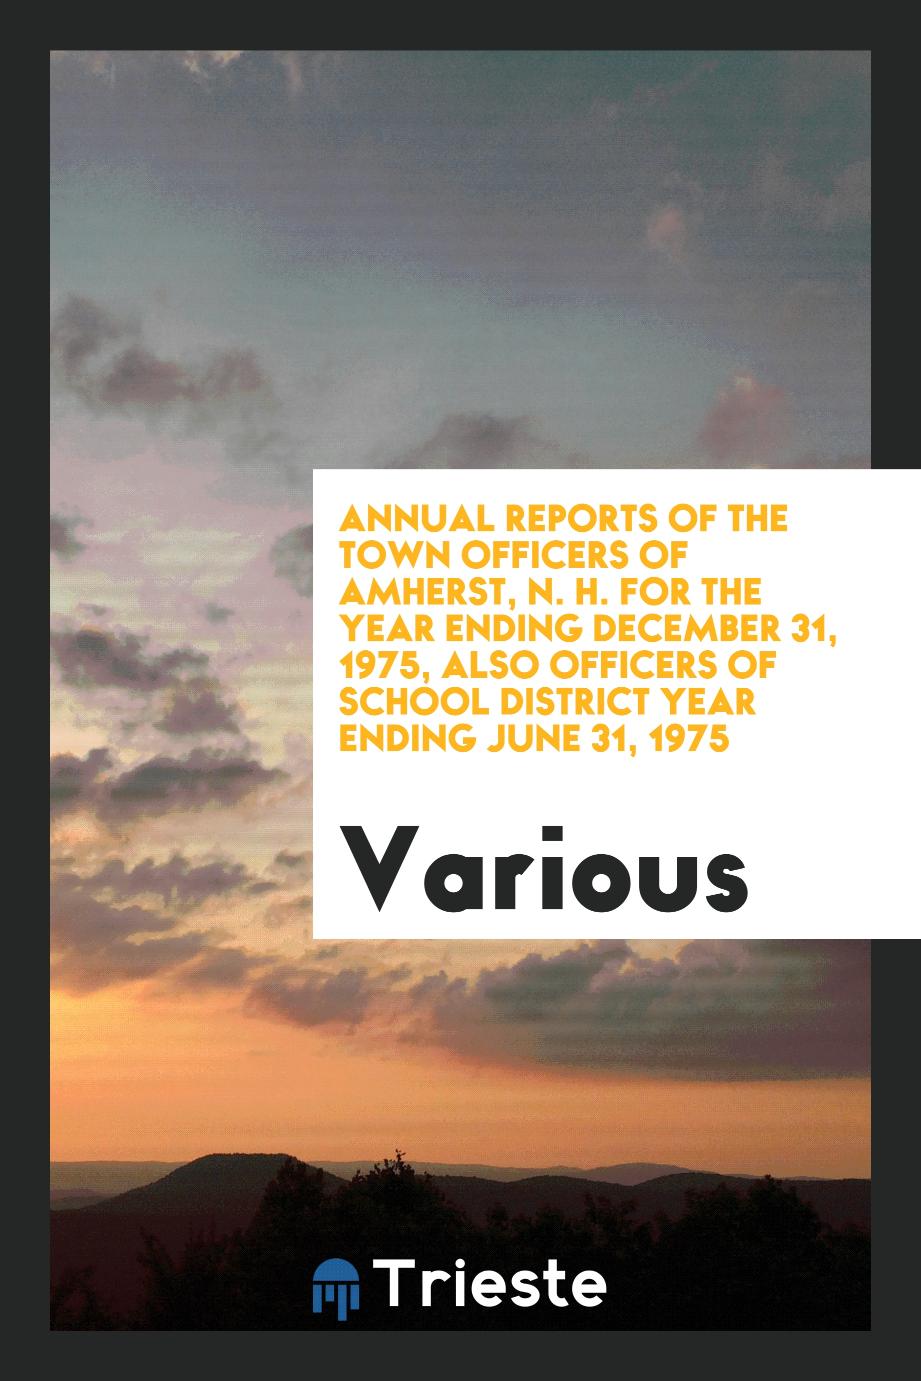 Annual reports of the town officers of Amherst, N. H. for the year ending December 31, 1975, Also Officers of School District year ending June 31, 1975